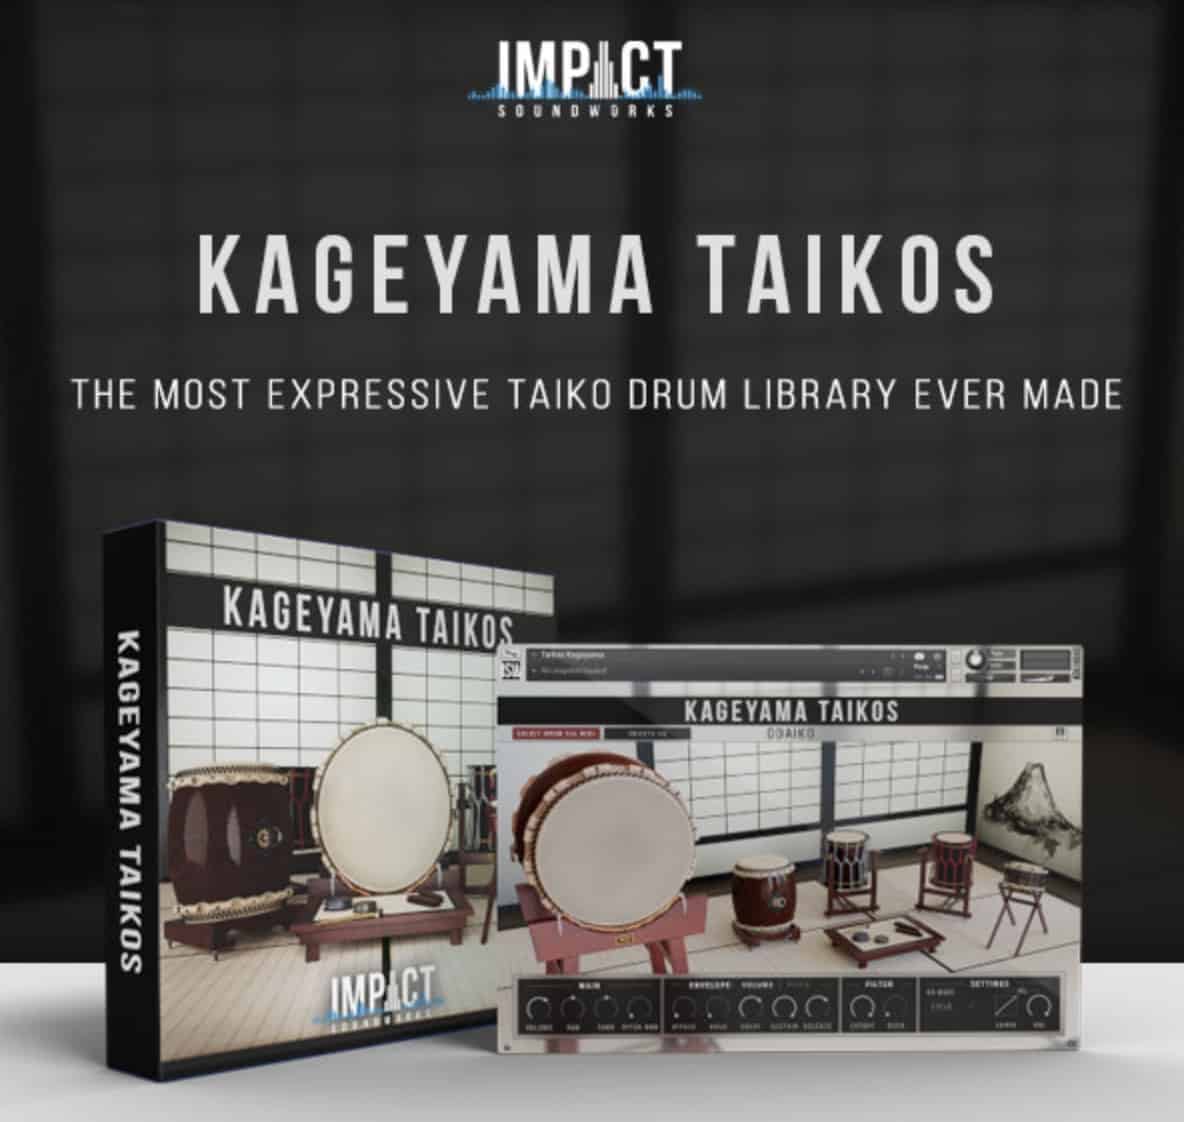 Kageyama-Taikos-A-Sound-Library-That-Will-Change-The-Way-You-Hear-Percussion